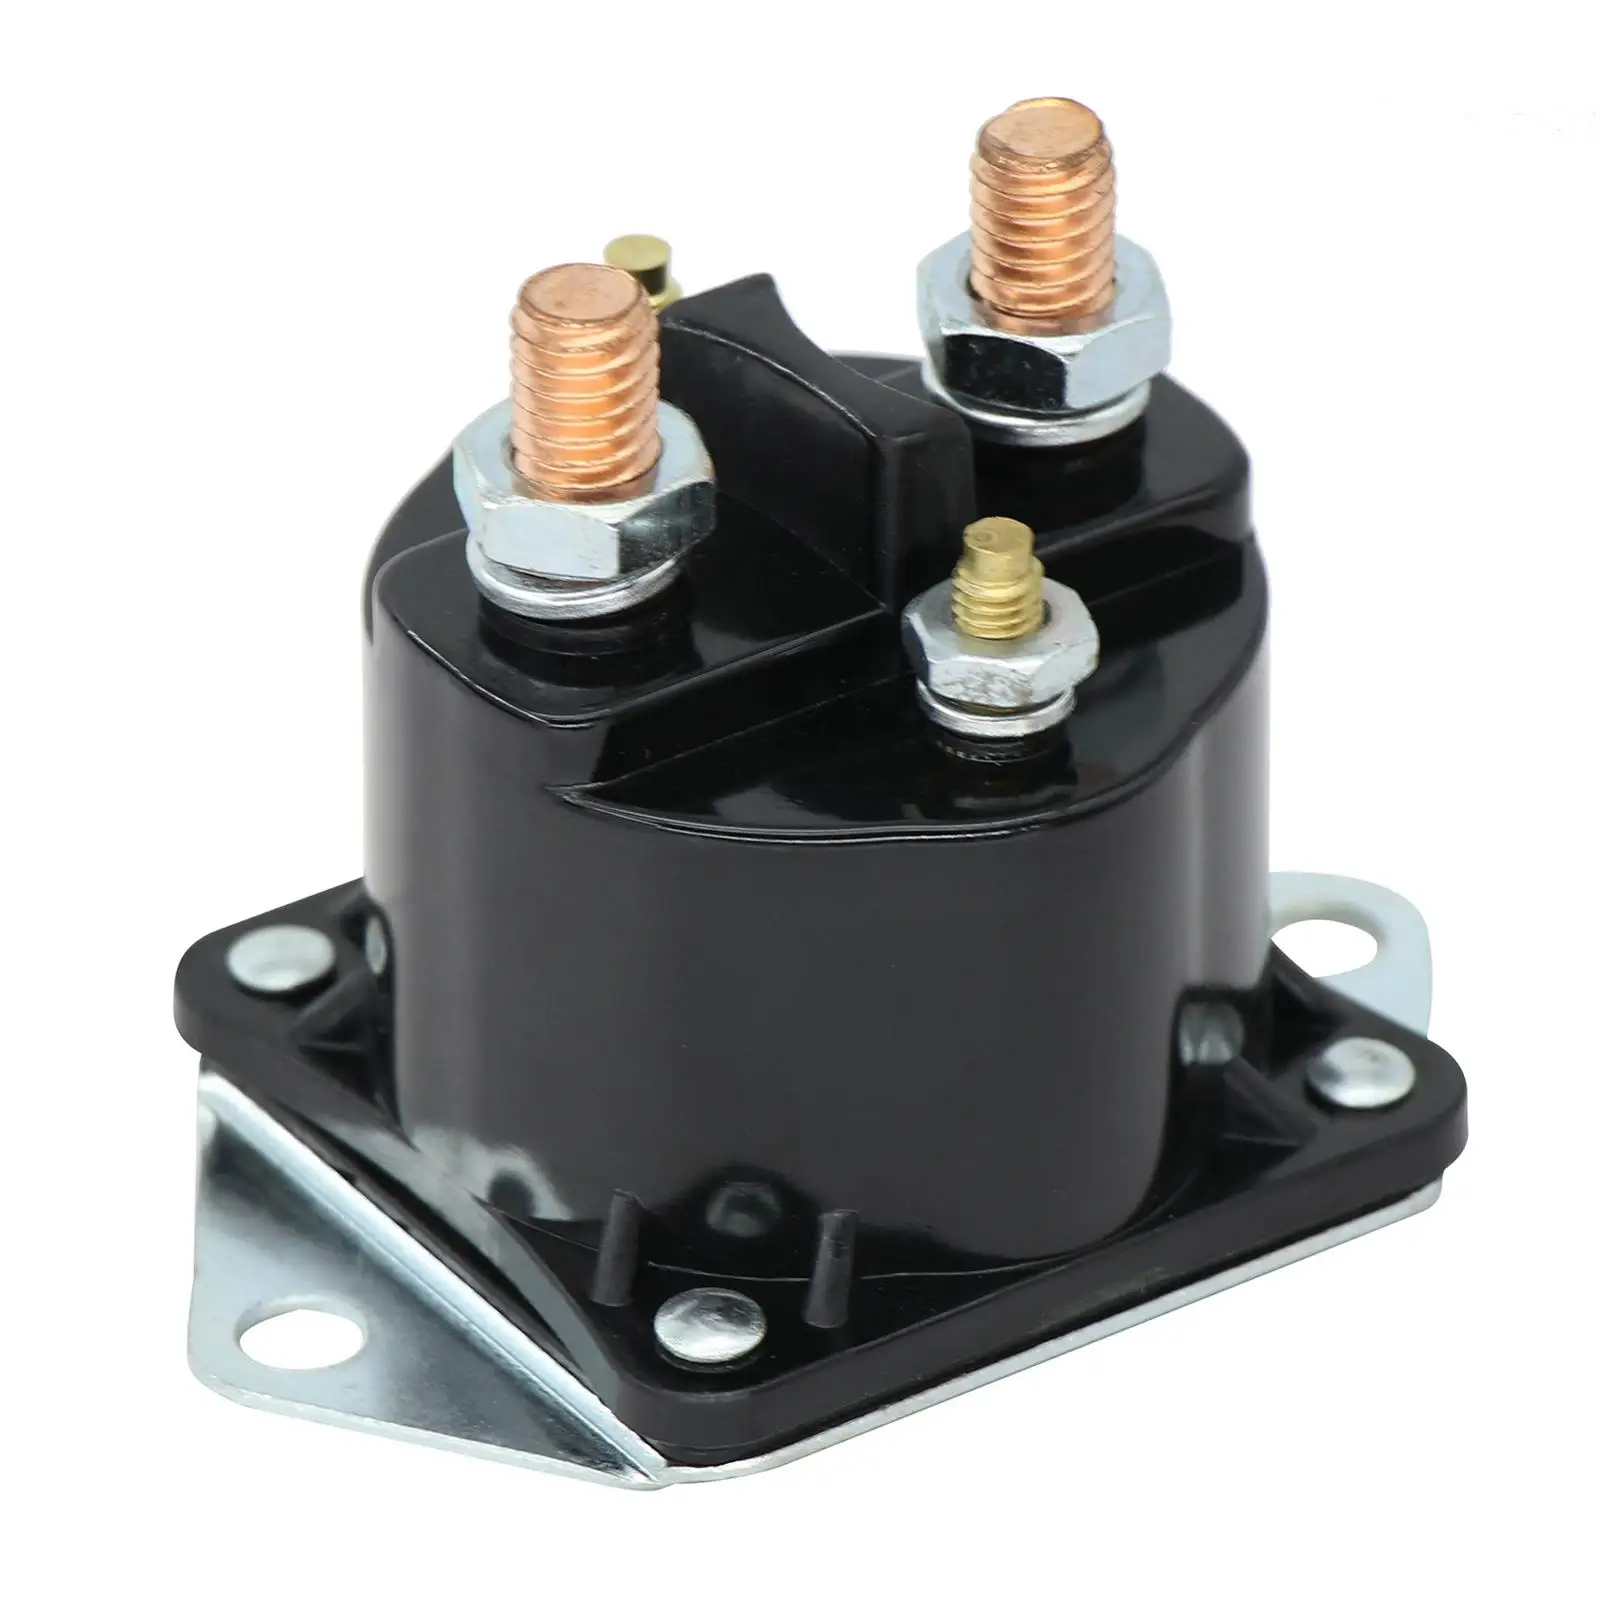 12V Solenoid Switch 1013609 Replace Parts Durable Fittings Stable Performance Accessories Automotive for Club Car 1984-up